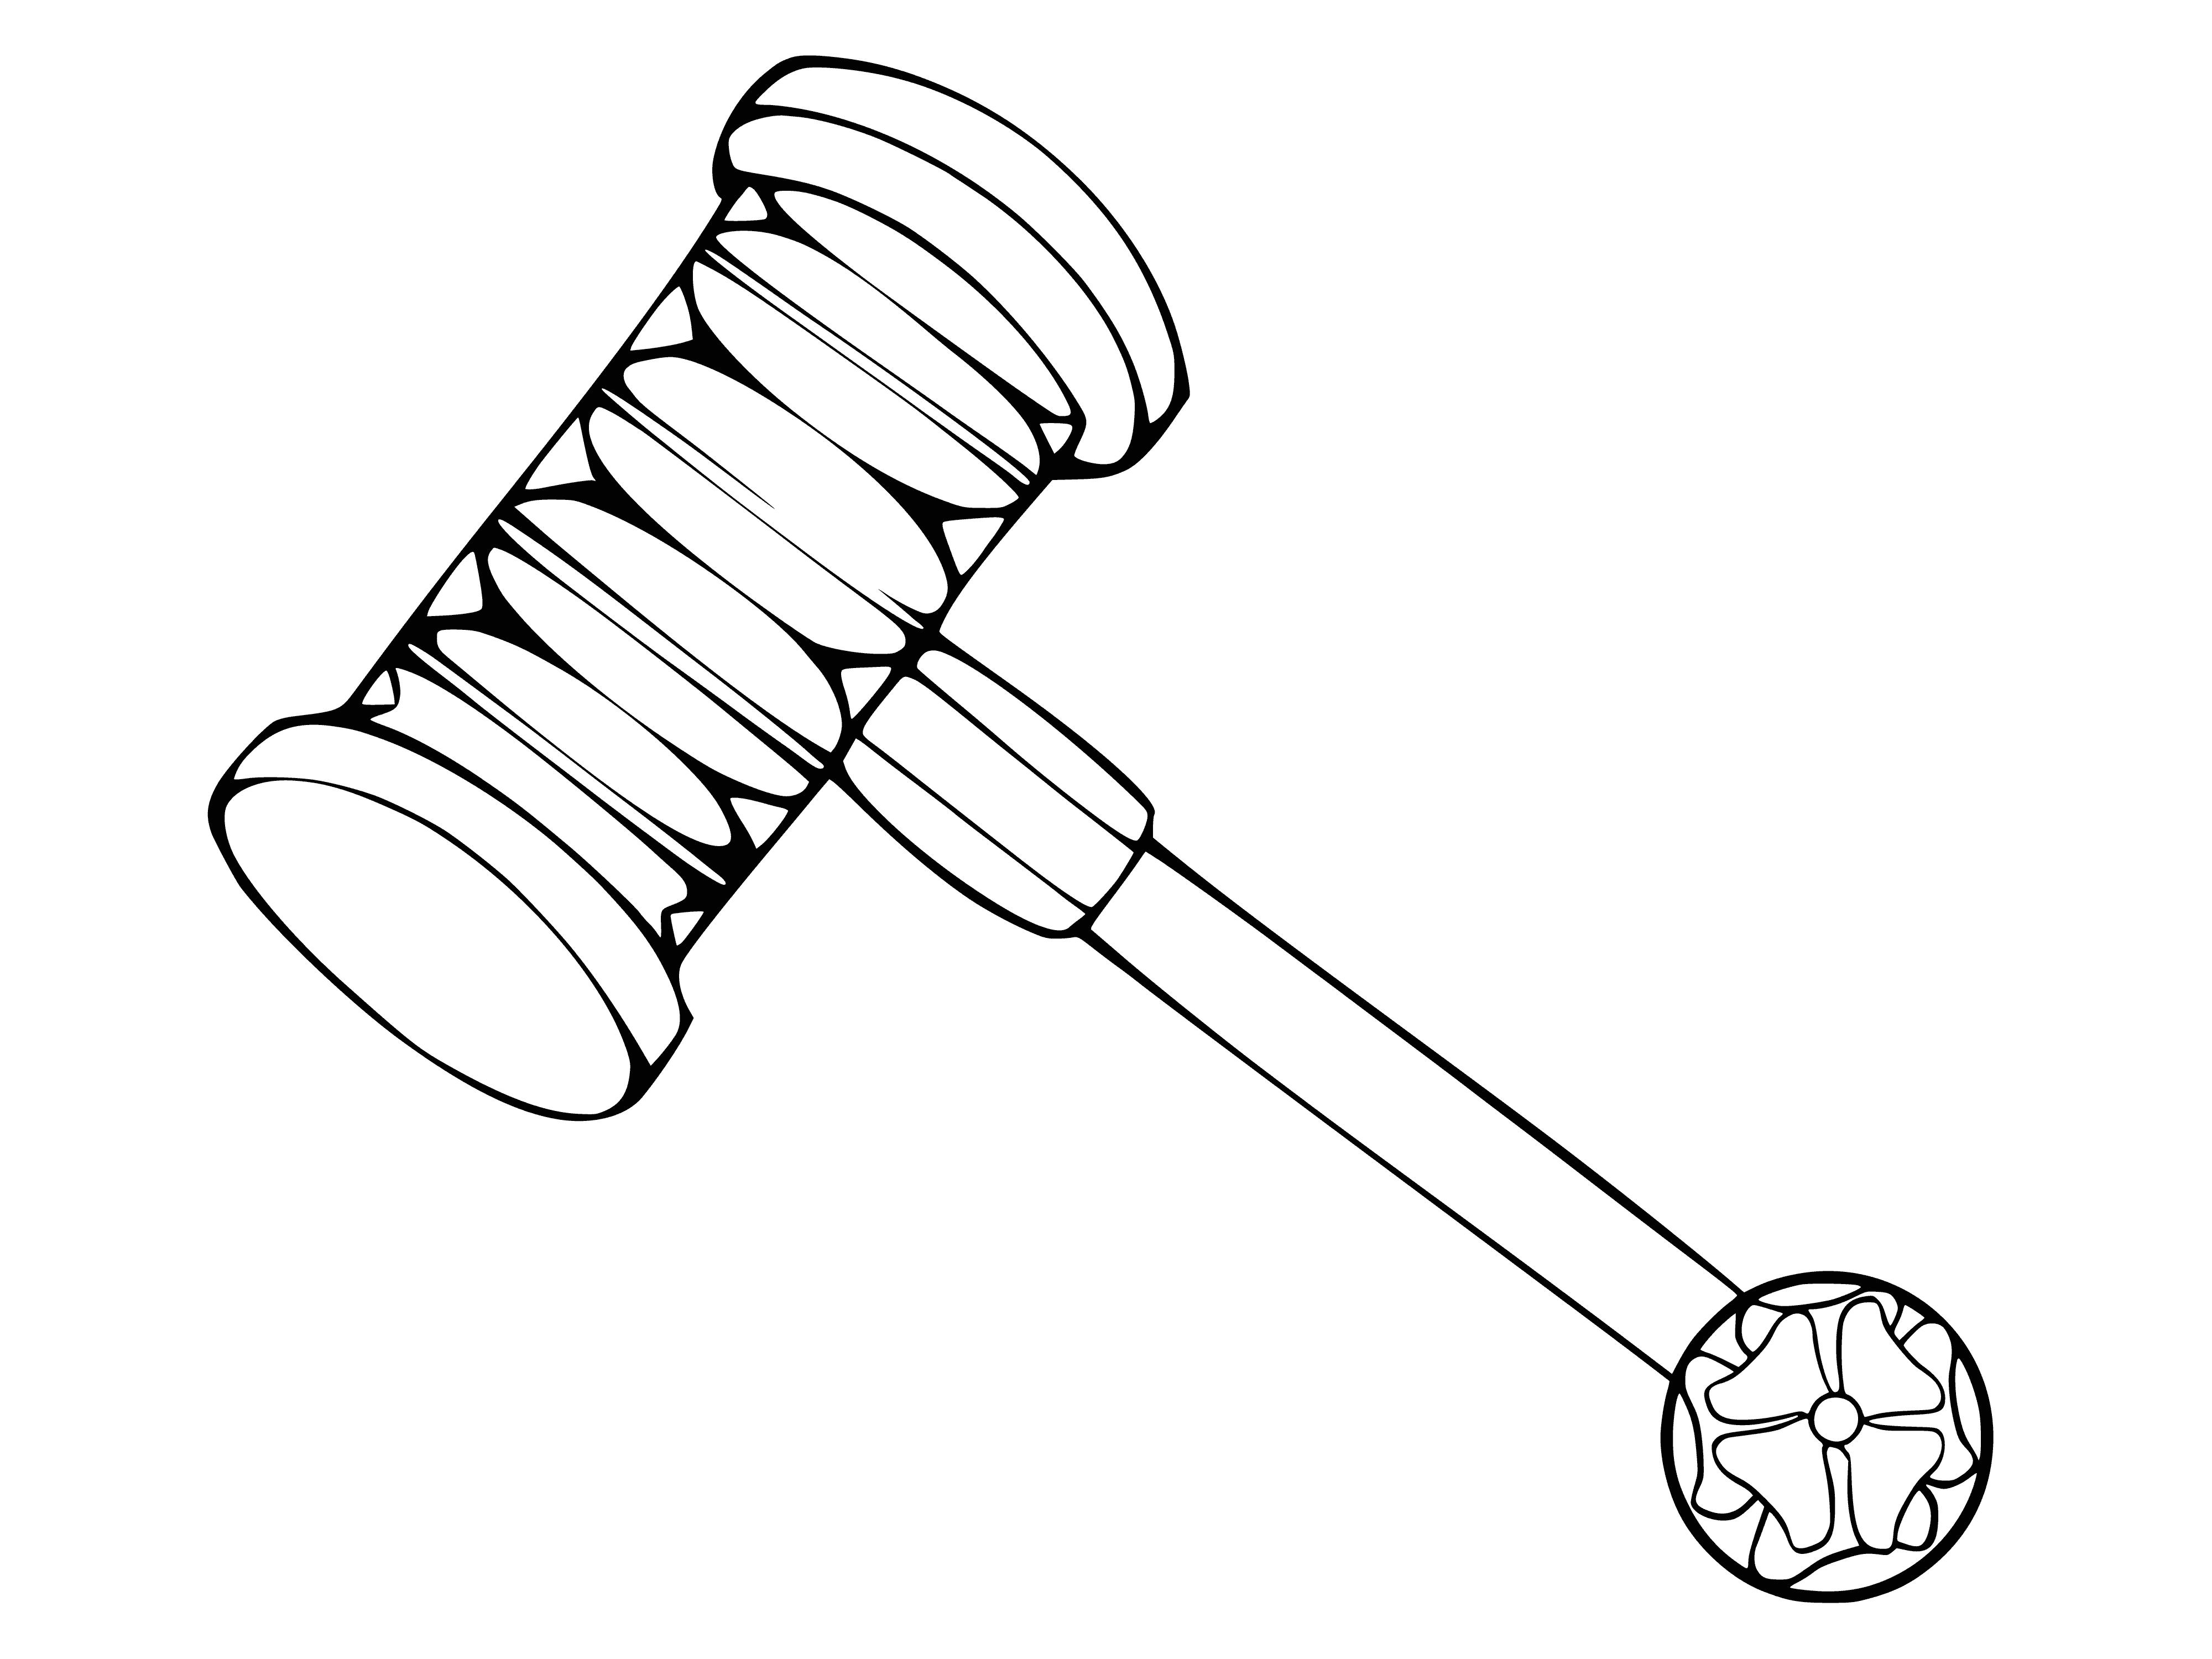 Musical gavel coloring page